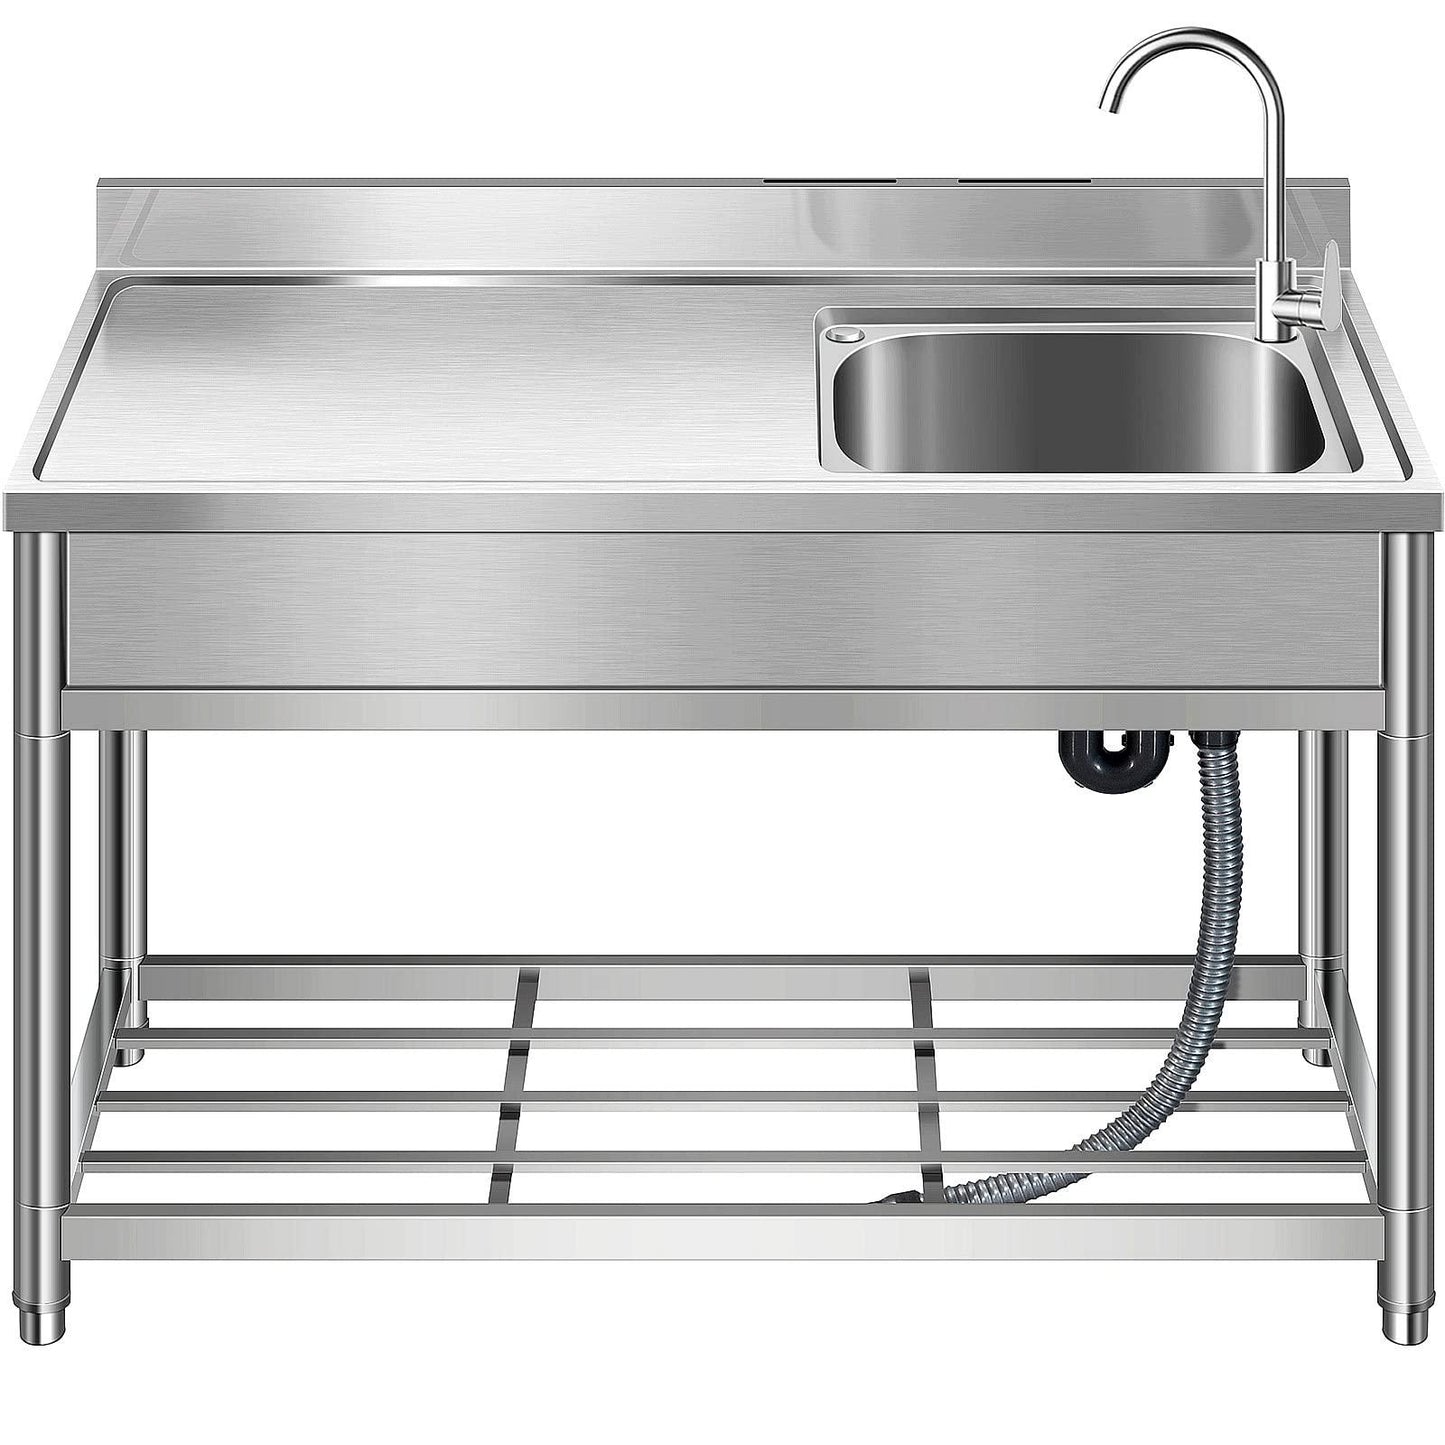 Free Standing Stainless-Steel Single Bowl, Commercial Restaurant Kitchen Sink Set w/Faucet & Drainboard, Prep & Utility Washing Hand Basin w/Workbench & Storage Shelves Indoor Outdoor (47in) - CookCave